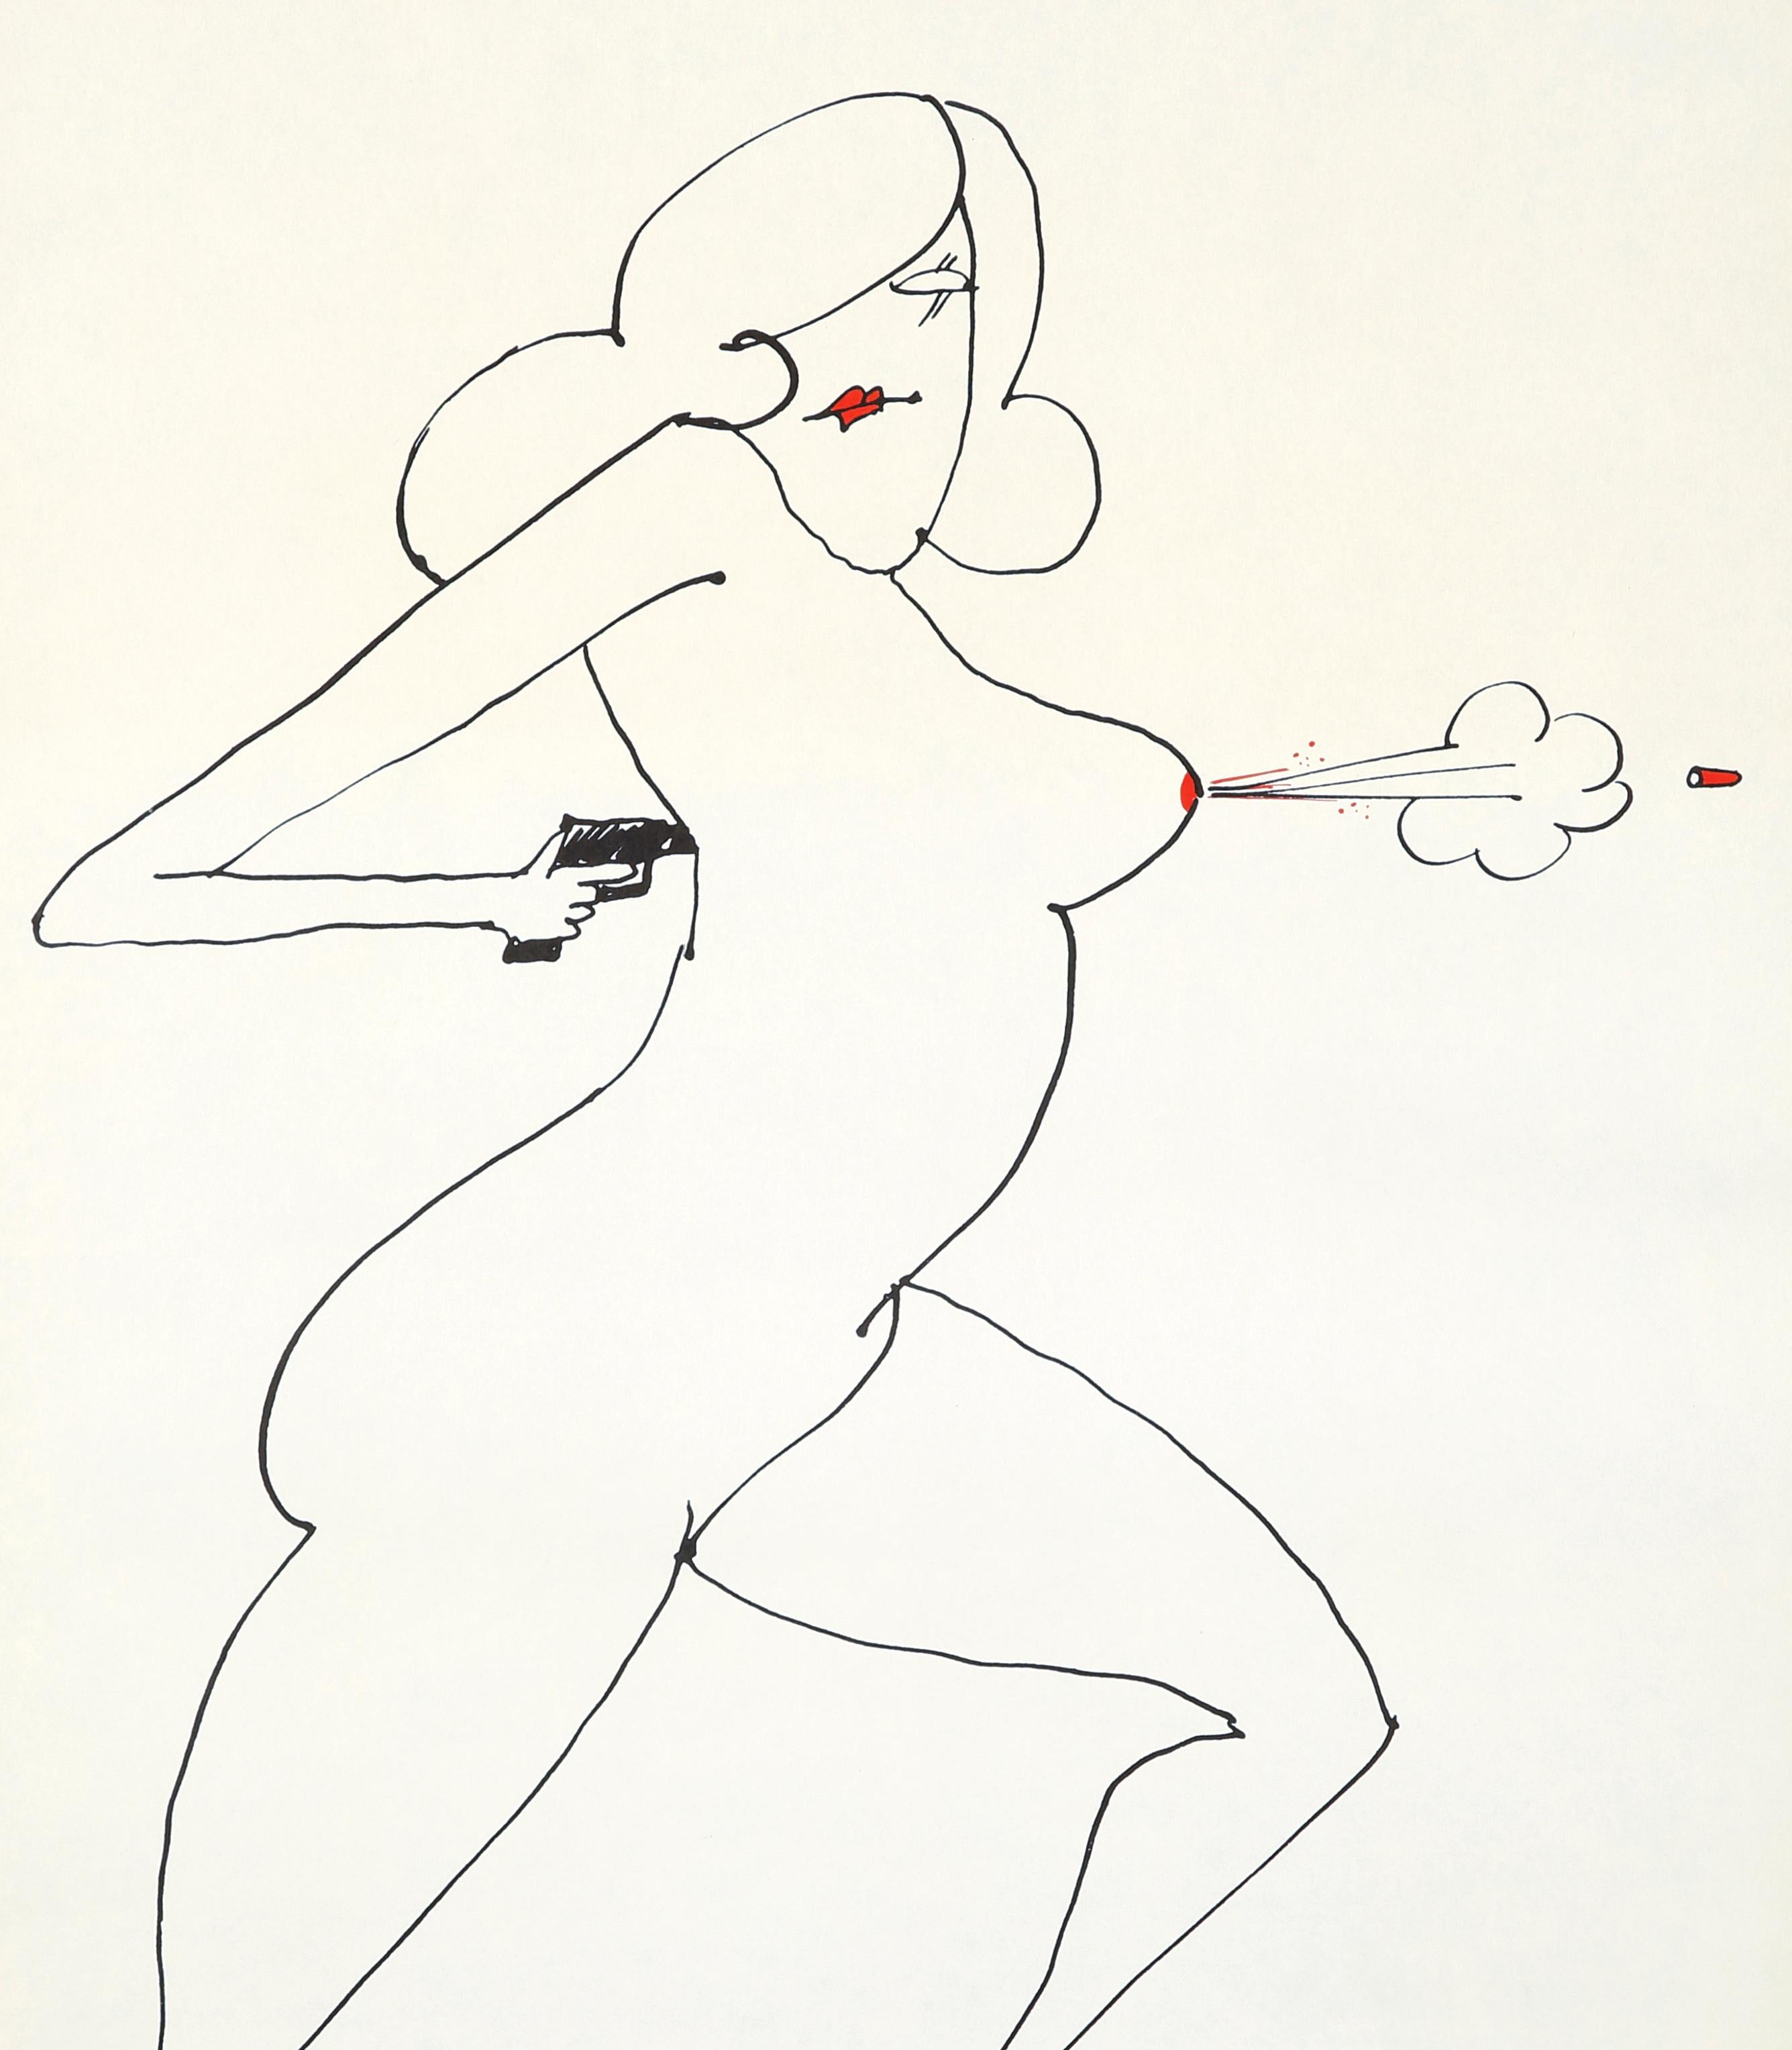 Tomi Ungerer Nude Gun a selection from Underground Sketchbook:
First printing, 1965.
Medium: Vintage poster.
Size: 23 in. x 29 in. (58.42 cm x 73.66 cm)
Minor wear consistent with age and medium; otherwise very nice.

Renowned for his iconic